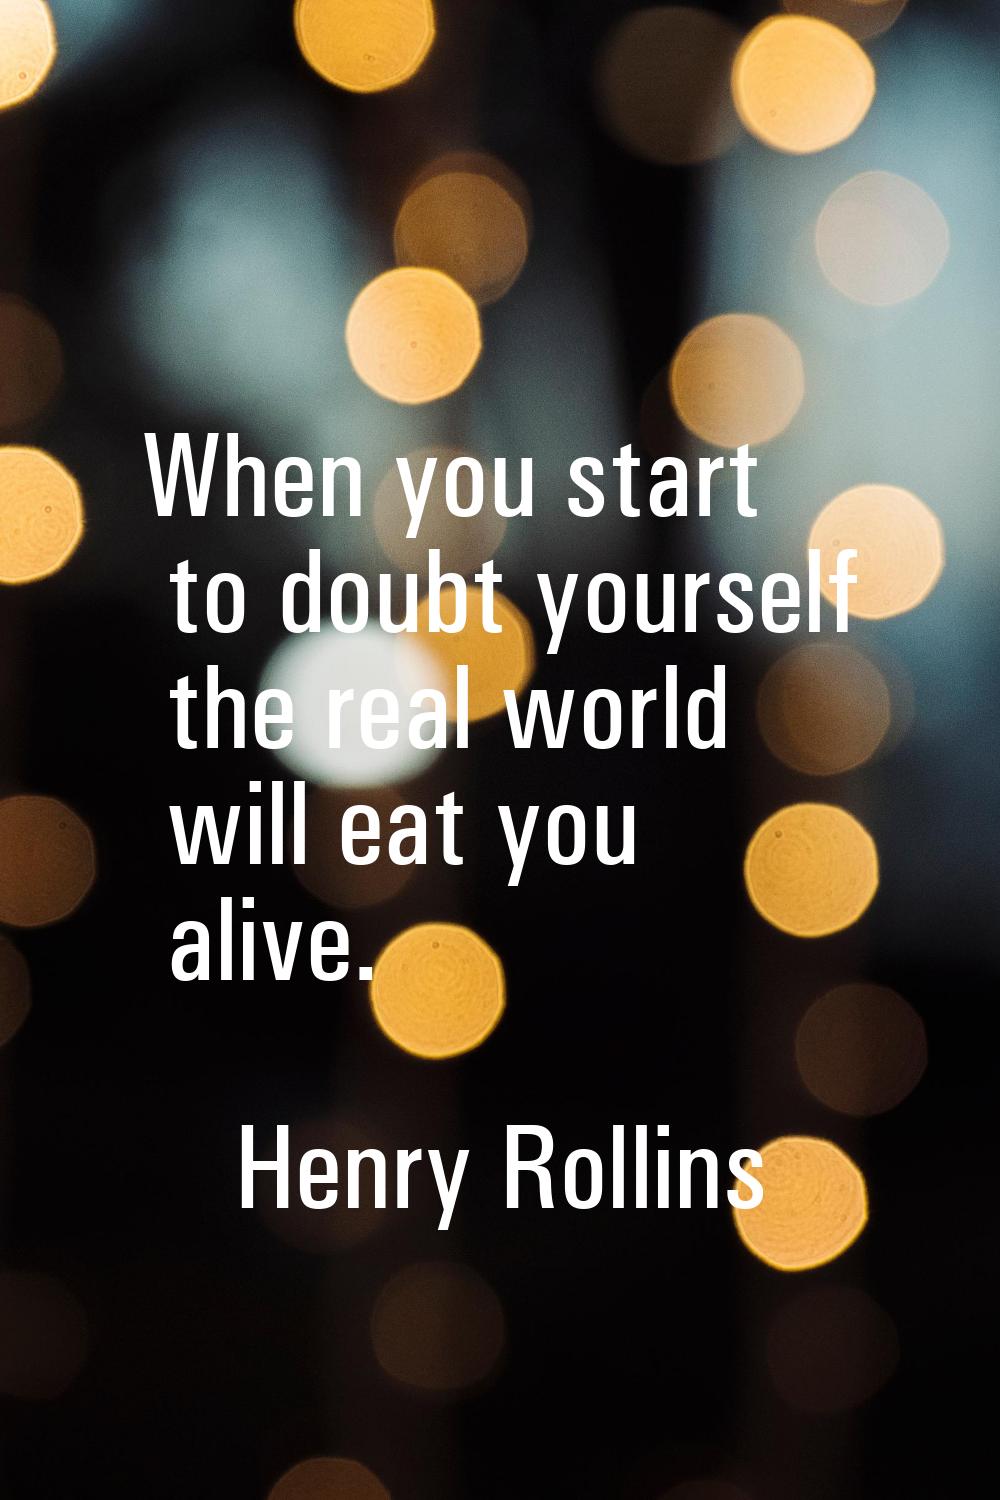 When you start to doubt yourself the real world will eat you alive.